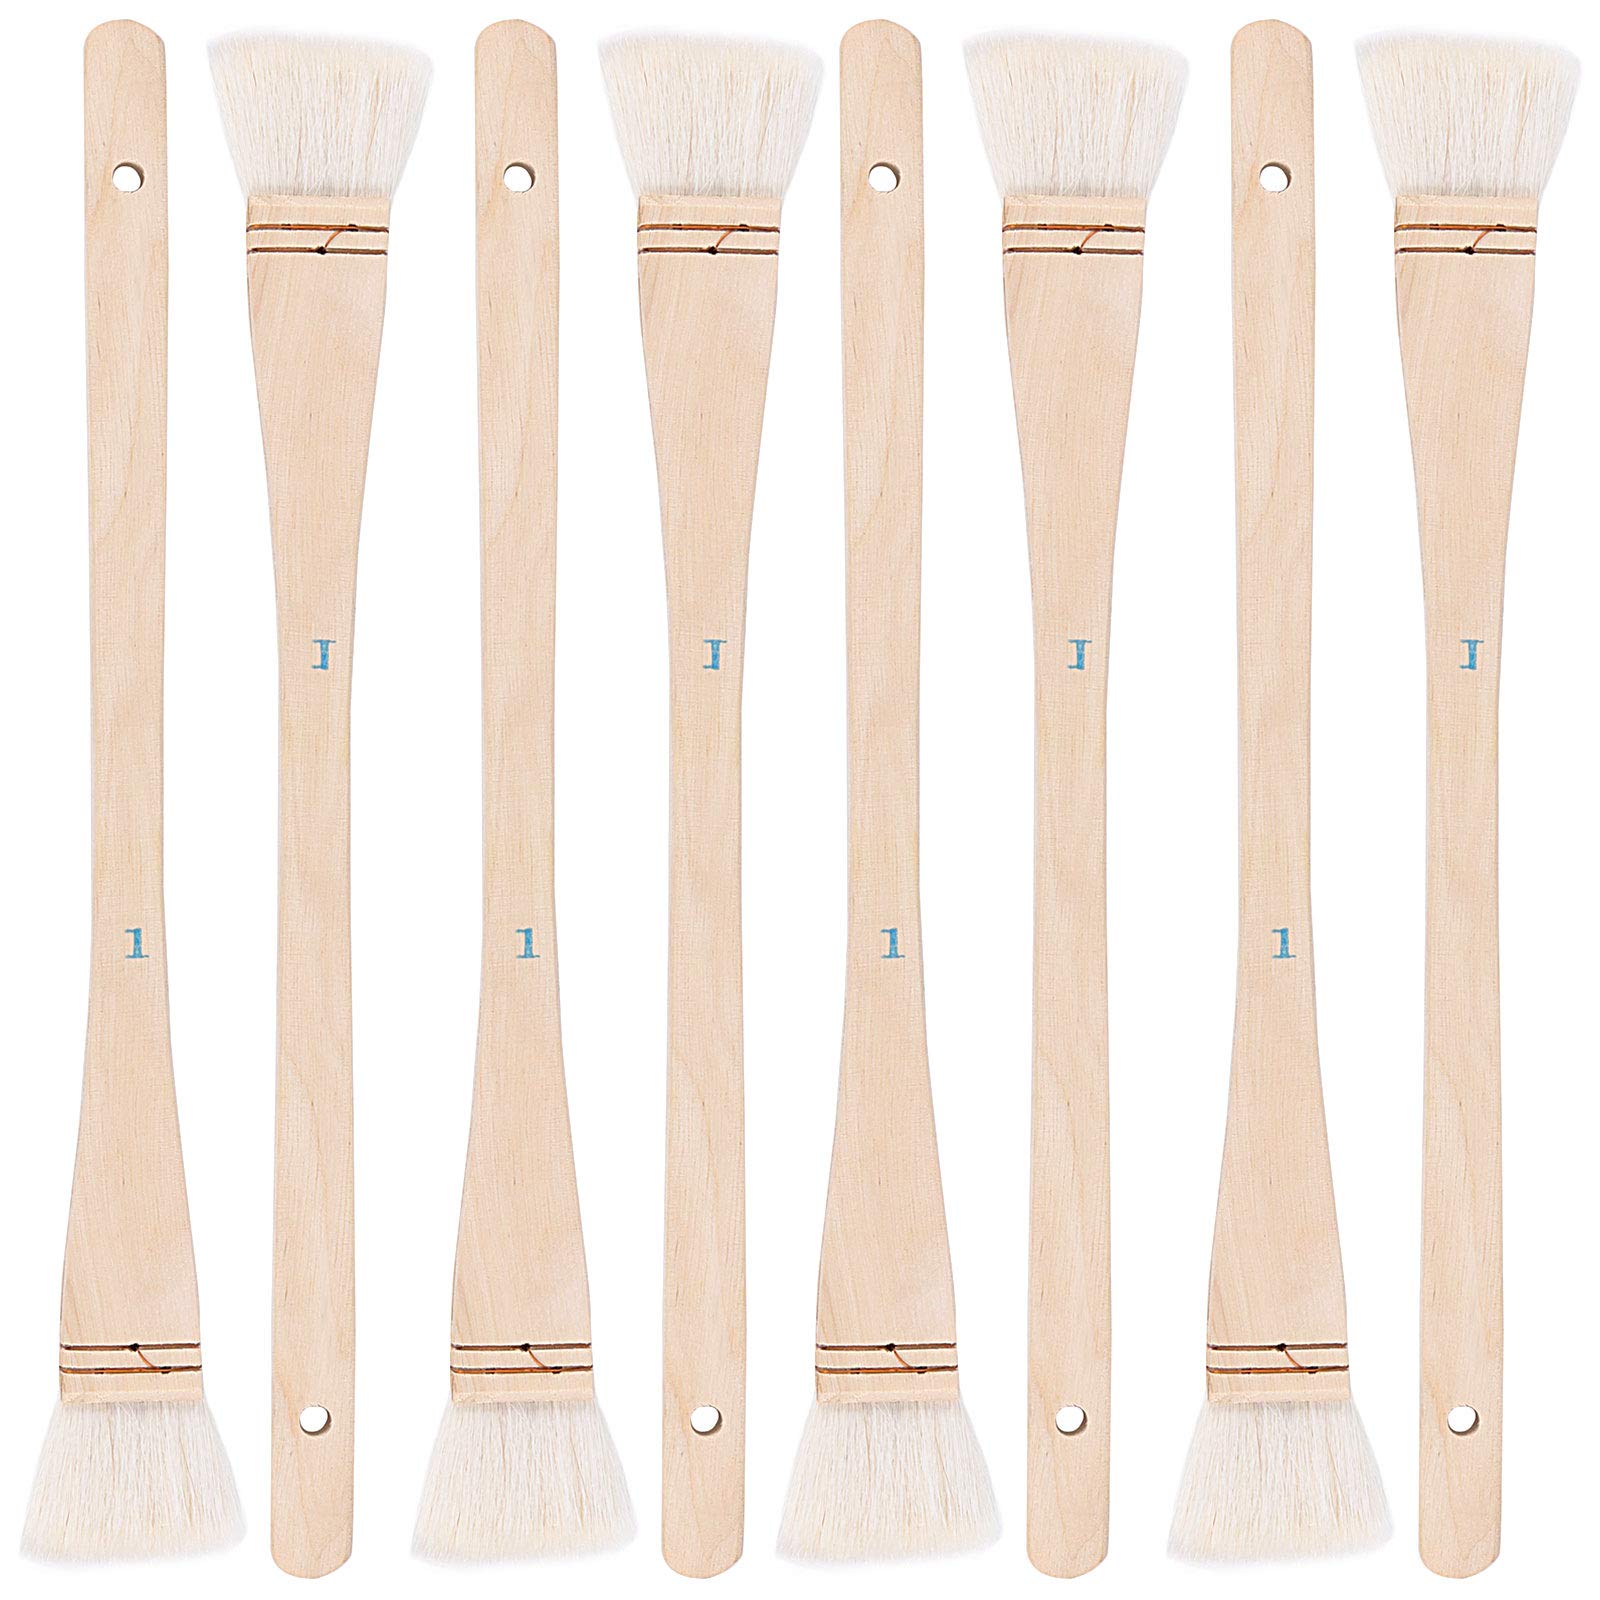 ZEONHEI 8 PCS 1 Inch Flat Hake Brushes Soft Goat Hair Brush and Hake Paint  Brush with Solid Wooden Handle Hake Brush Set for Watercolor Pottery  Painting Arts 8 1 Inch